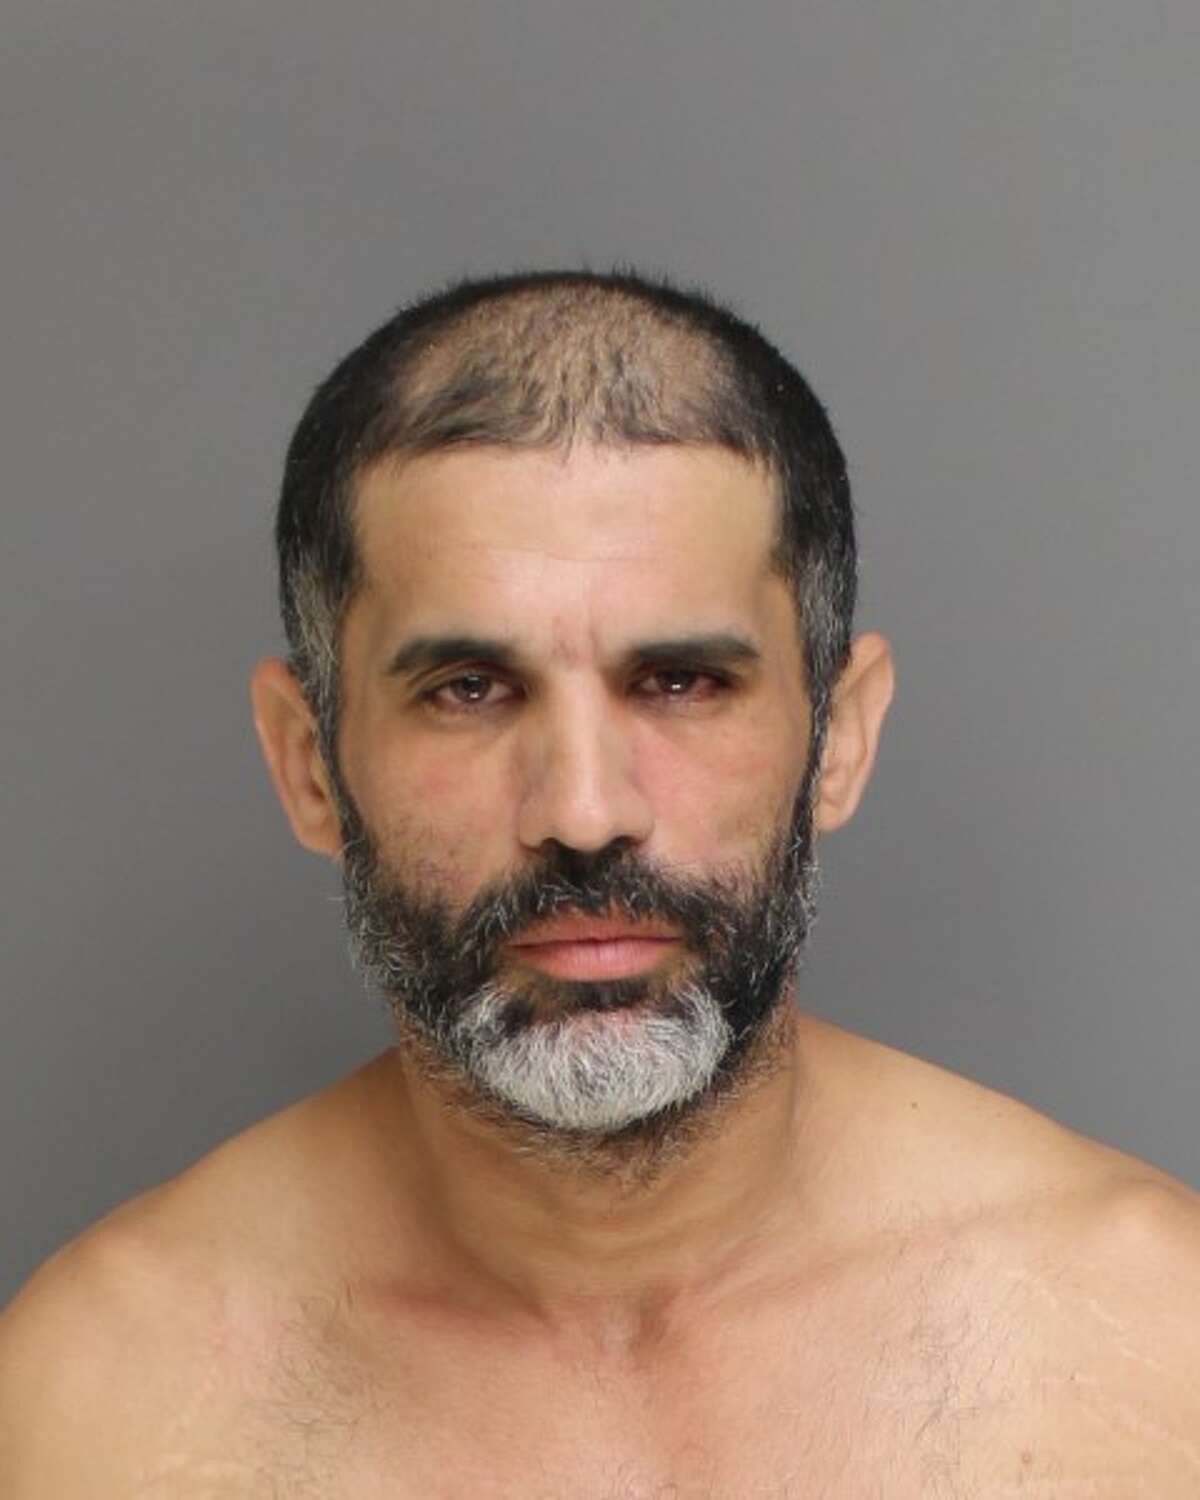 Jorge Ruiz, 46, of Bridgeport, is suspected in four February armed robberies that occurred a matter of weeks after he was released from state prison, according to local police.